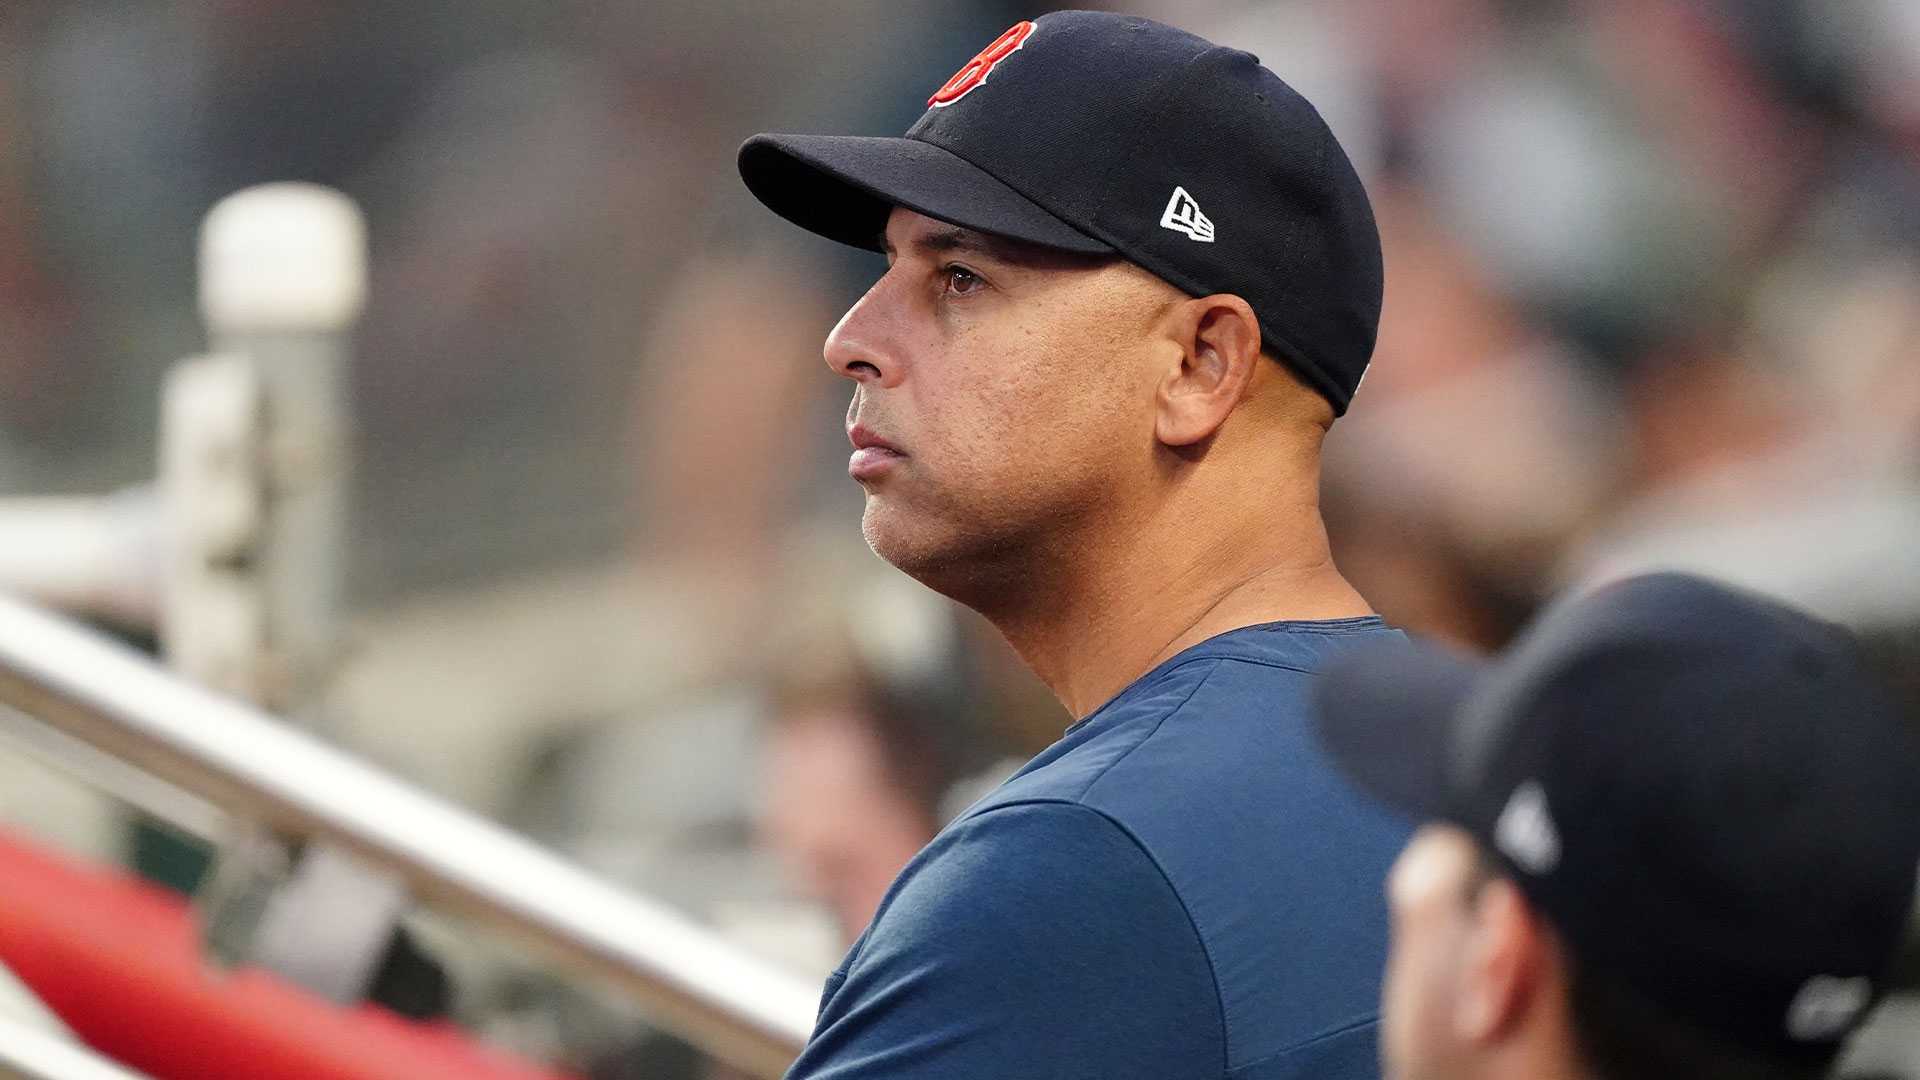 Valley News - Babe, Satch and A-Rod All Part of Miami's Baseball